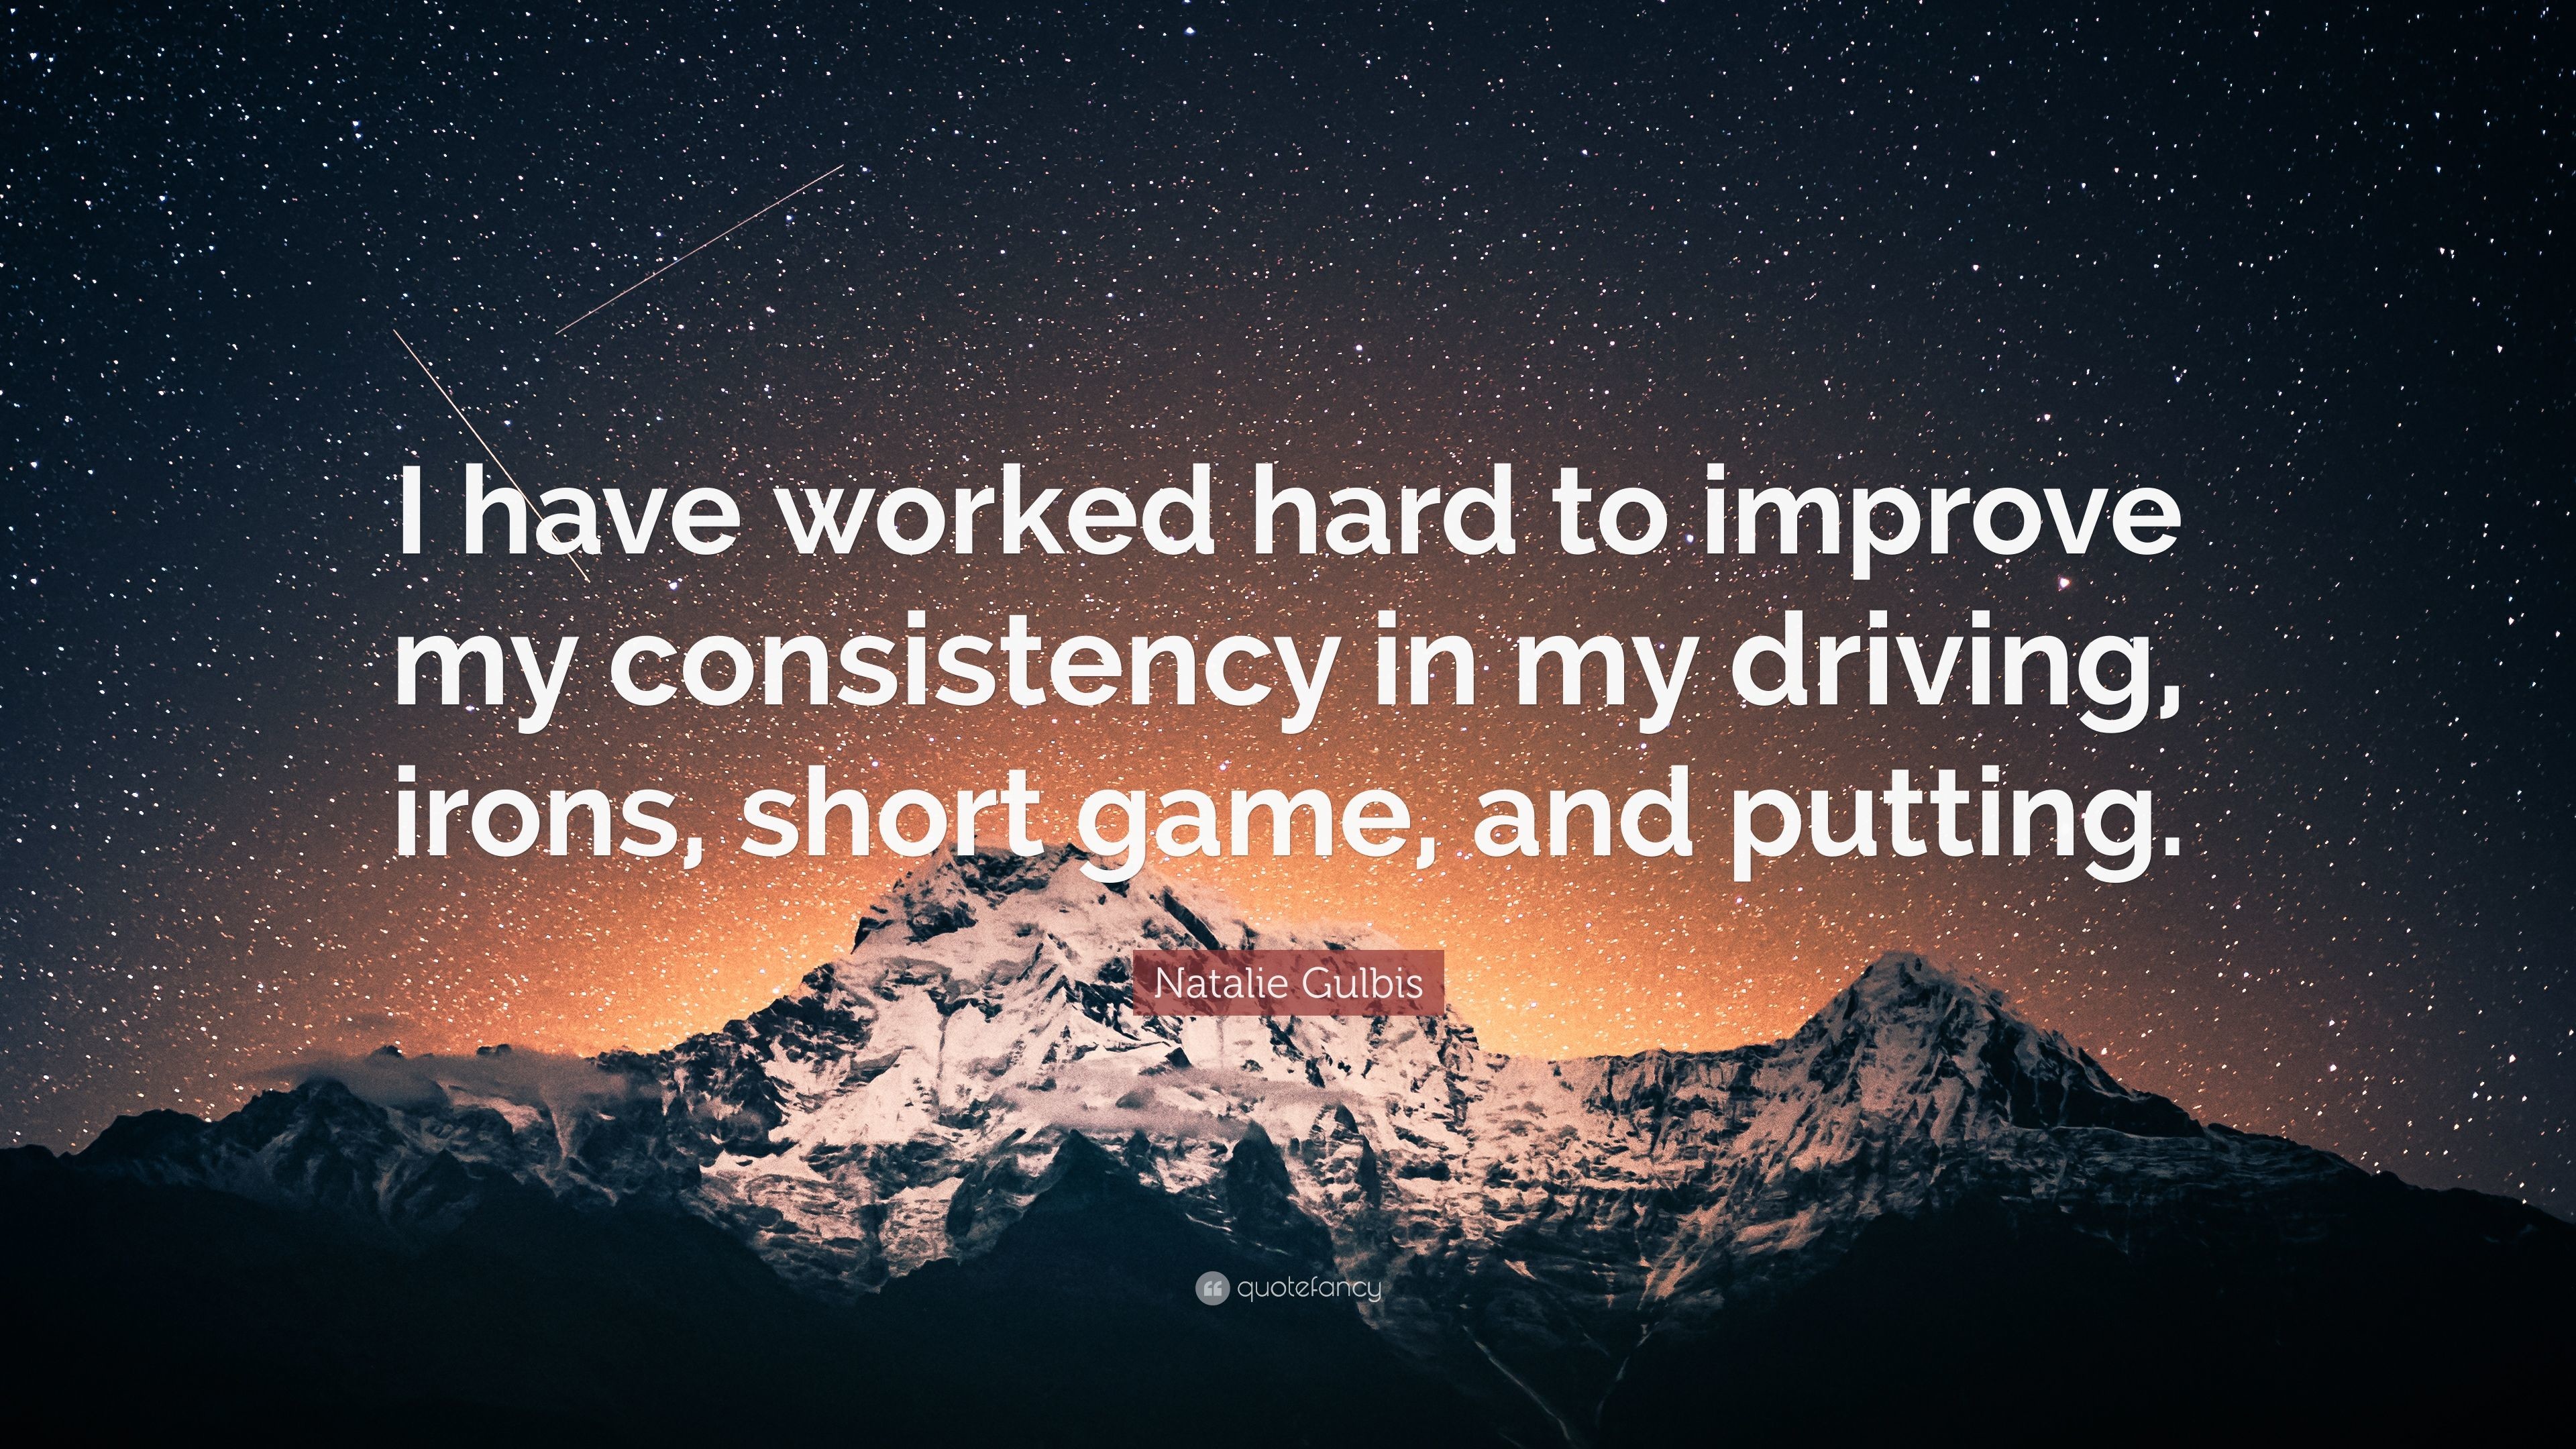 3840x2160 Natalie Gulbis Quote: “I have worked hard to improve my consistency in my  driving